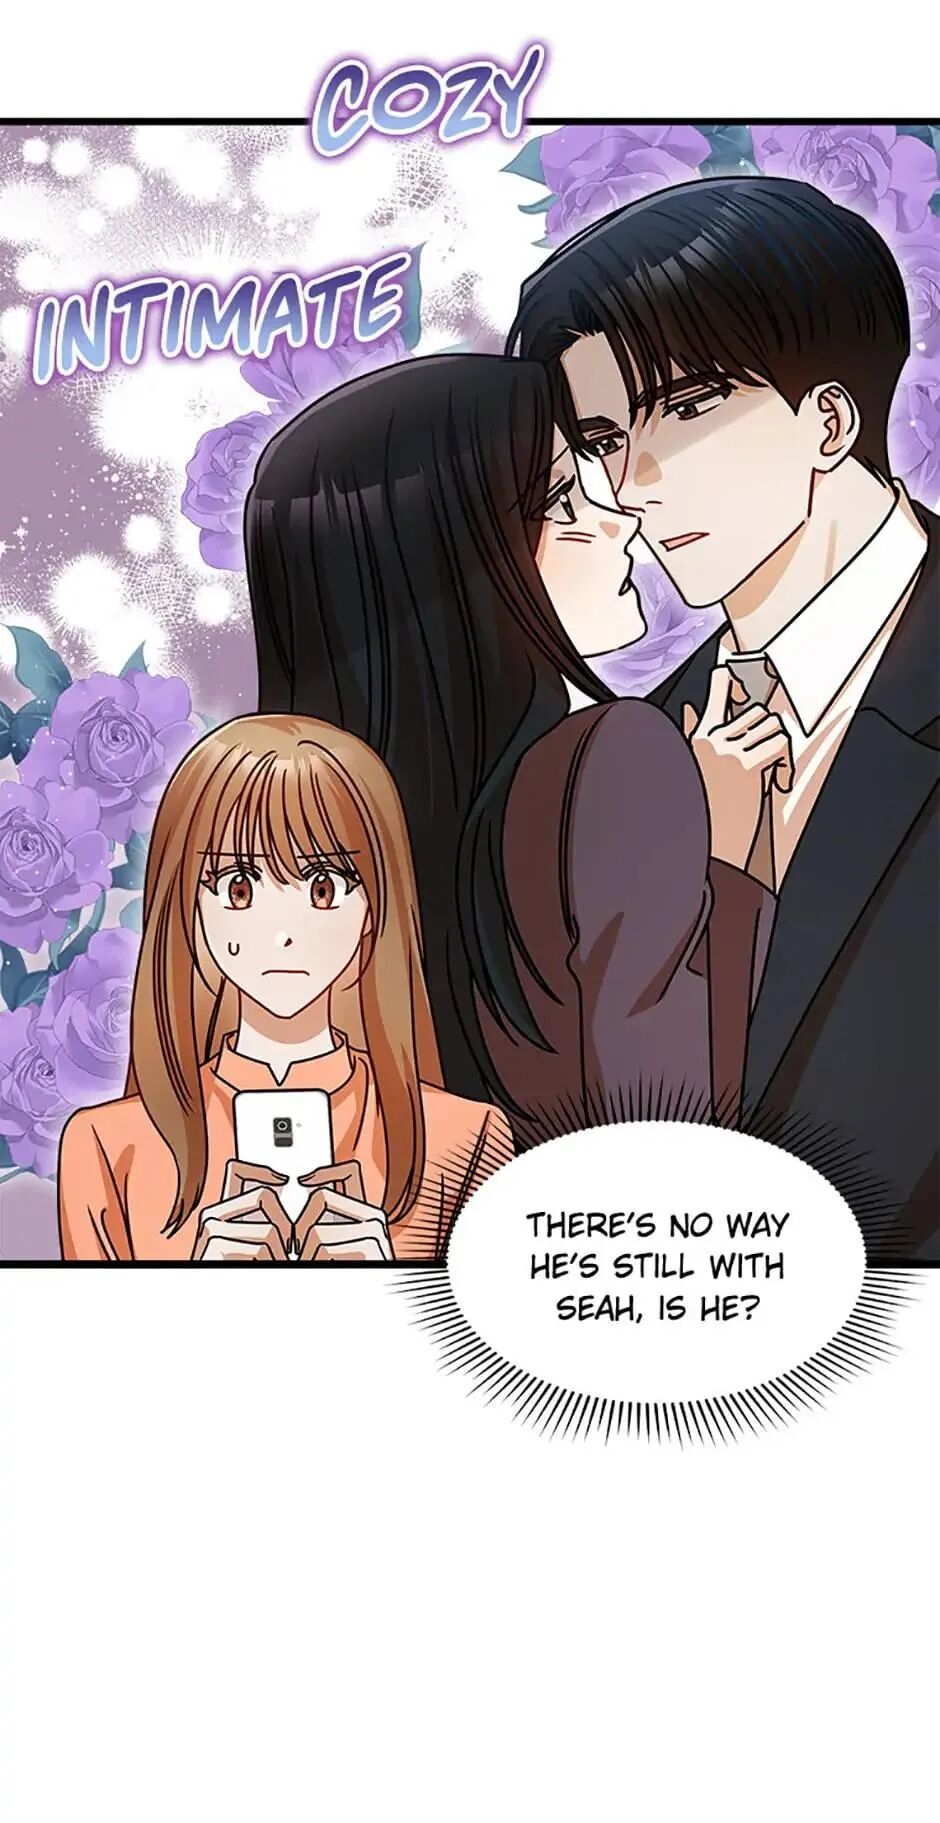 I Confessed to the Boss Chapter 37 - MyToon.net